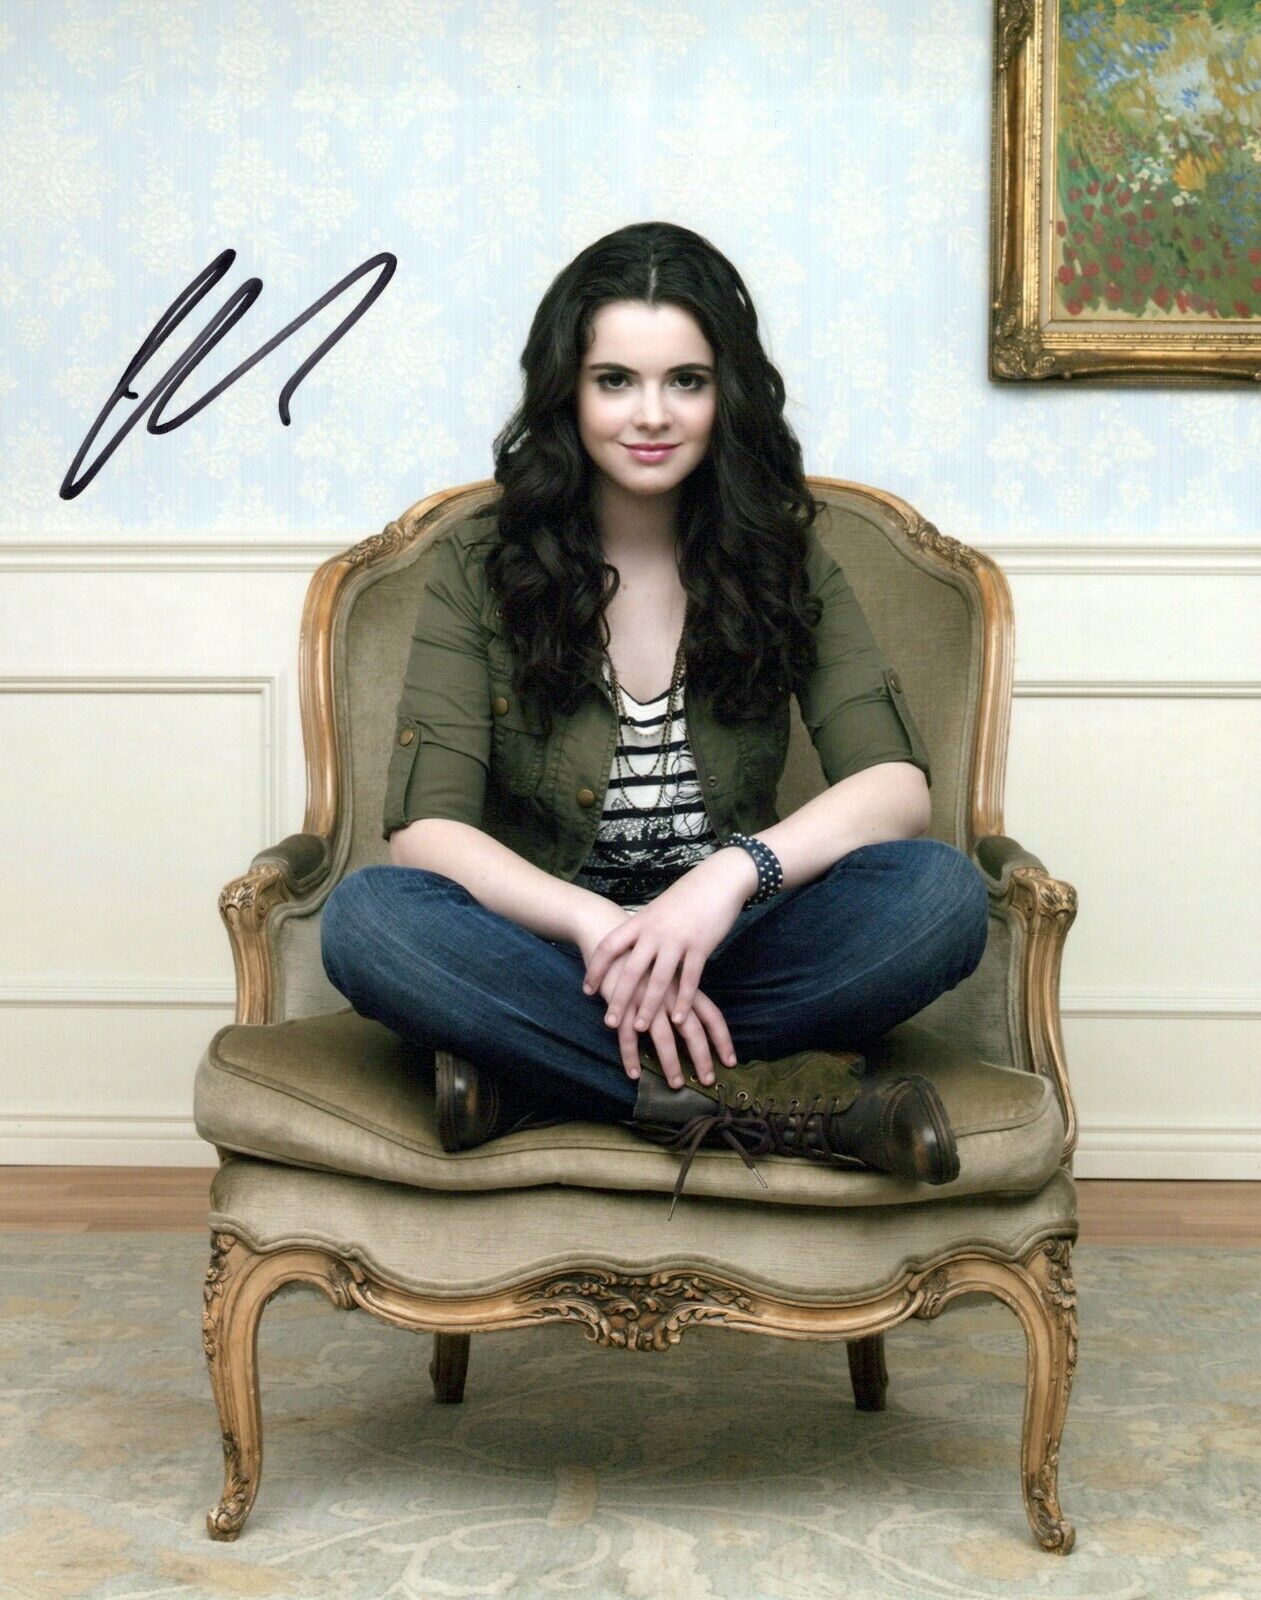 Vanessa Marano glamour shot autographed Photo Poster painting signed 8x10 #1